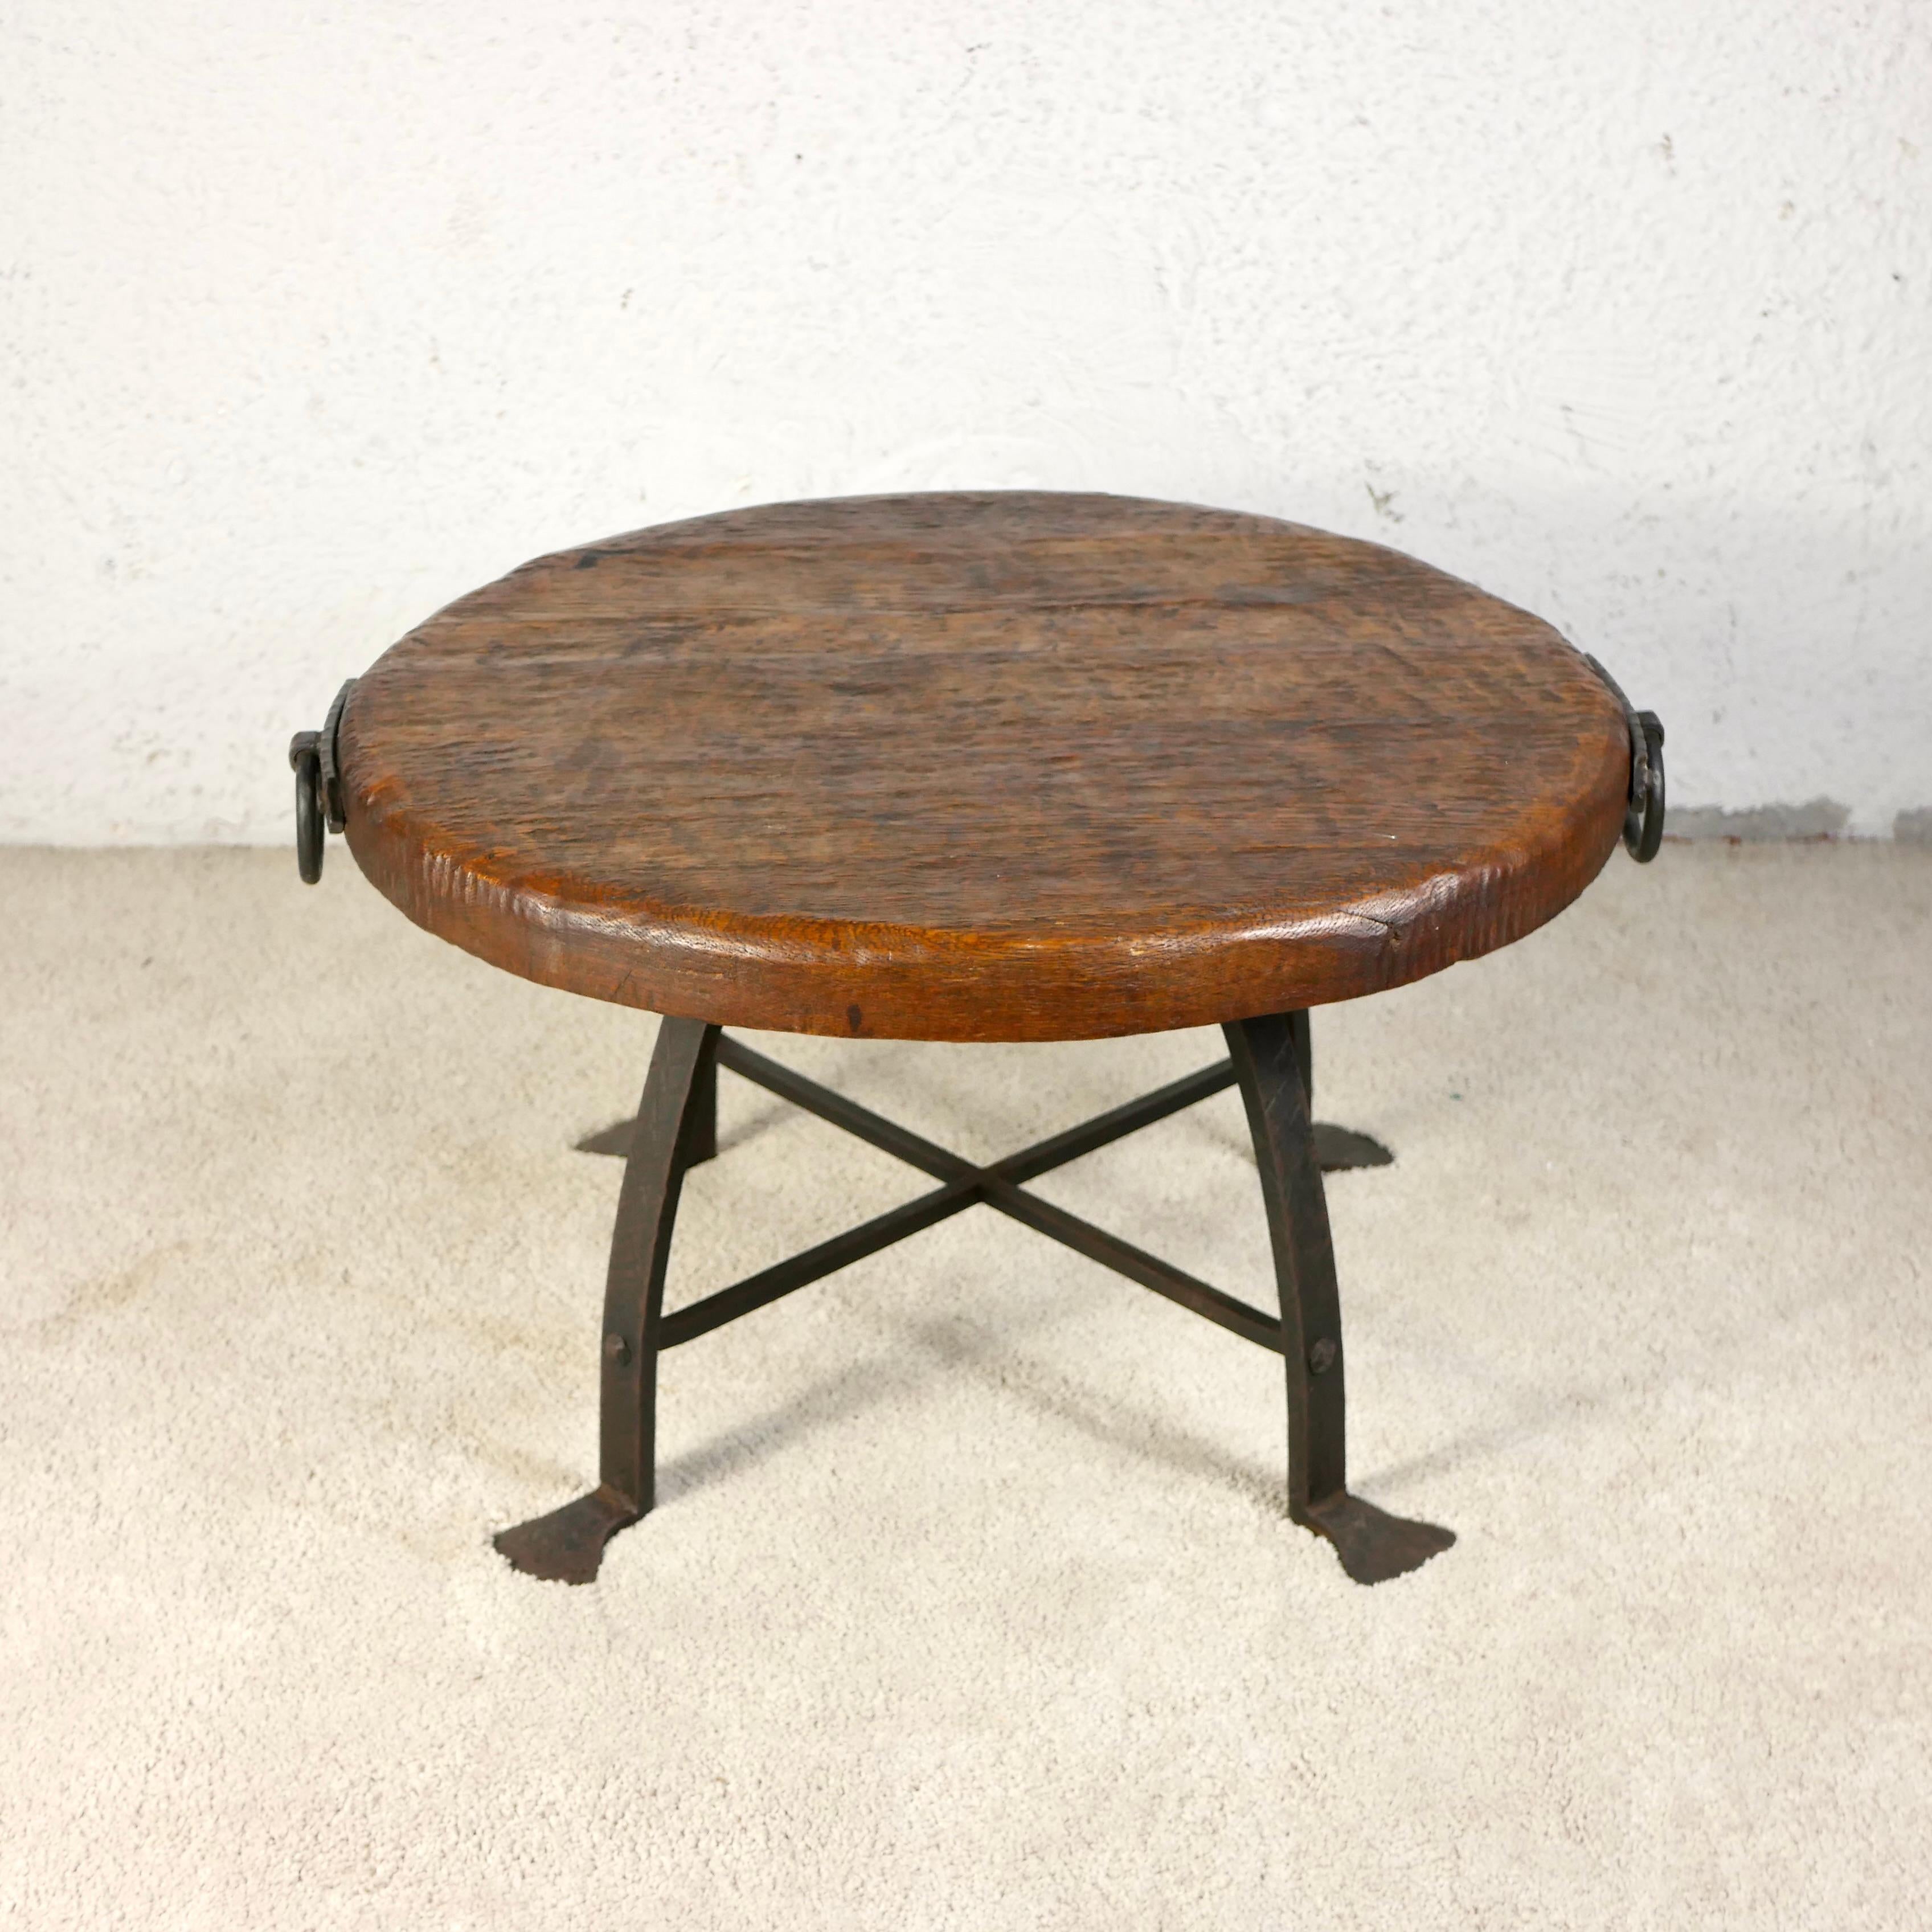 Beautiful mid-century brutalist round coffee table, anonymous work from Belgium, inspired by Jean Touret Atelier de Marolles.
Embossed wrought iron, and solid oak.
Very sturdy and charming.
Easy to move thank to the two chain loops.